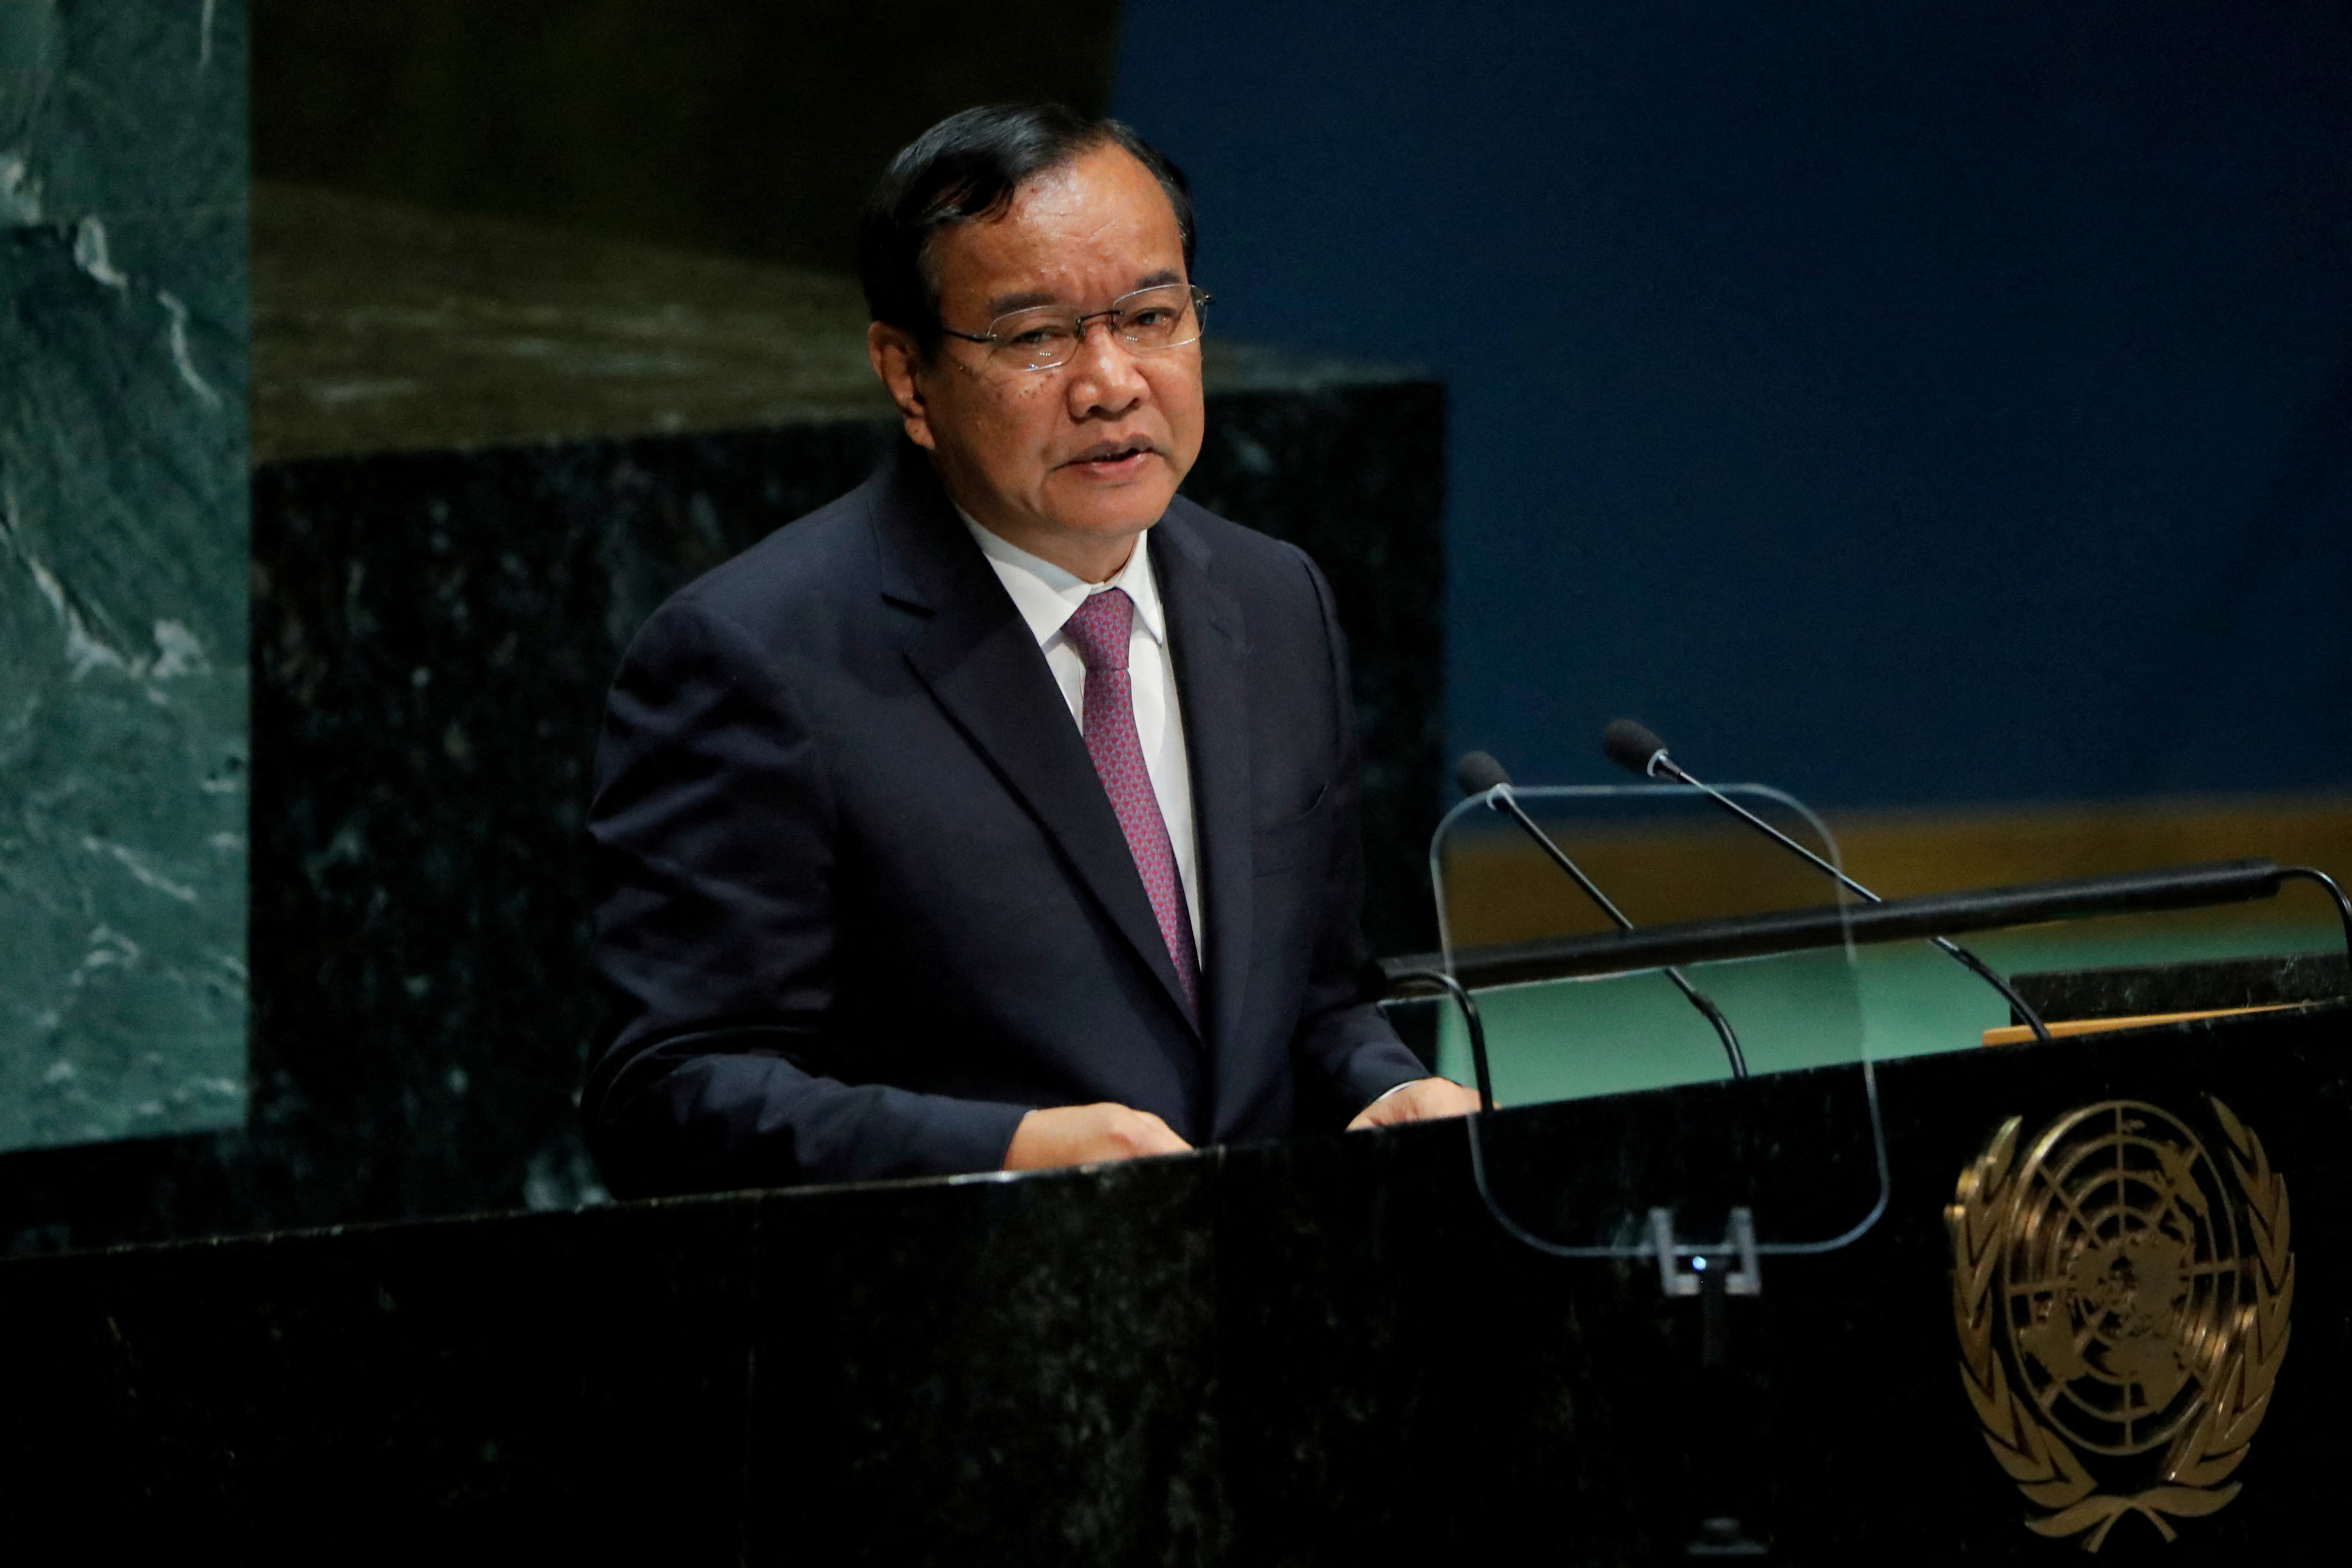 Cambodian Foreign Minister Prak Sokhonn addresses the 74th session of the United Nations General Assembly at U.N. headquarters in New York City, New York